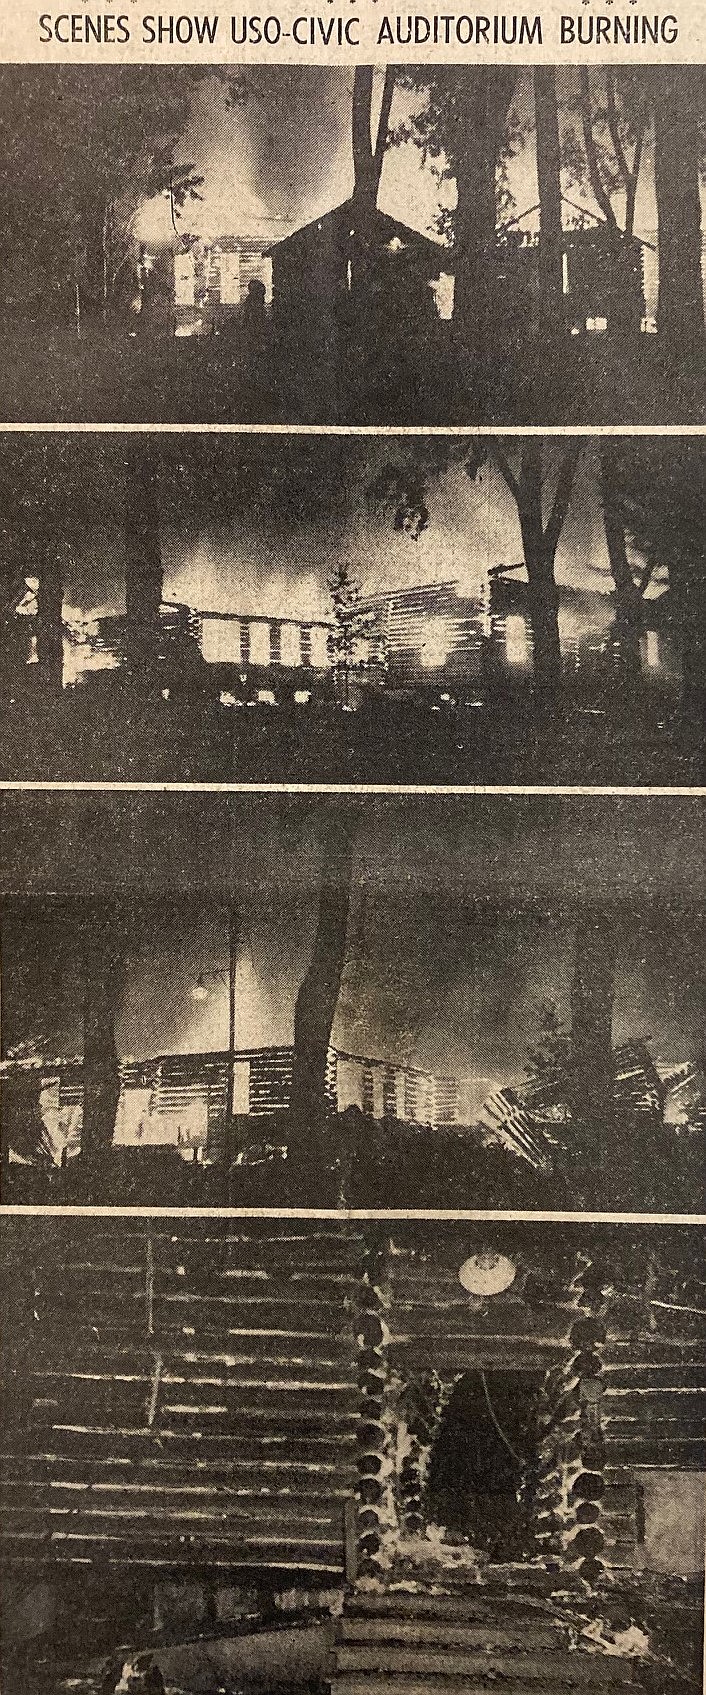 A series of photos shows the USO/civic auditorium burning Oct. 9-10, 1945.